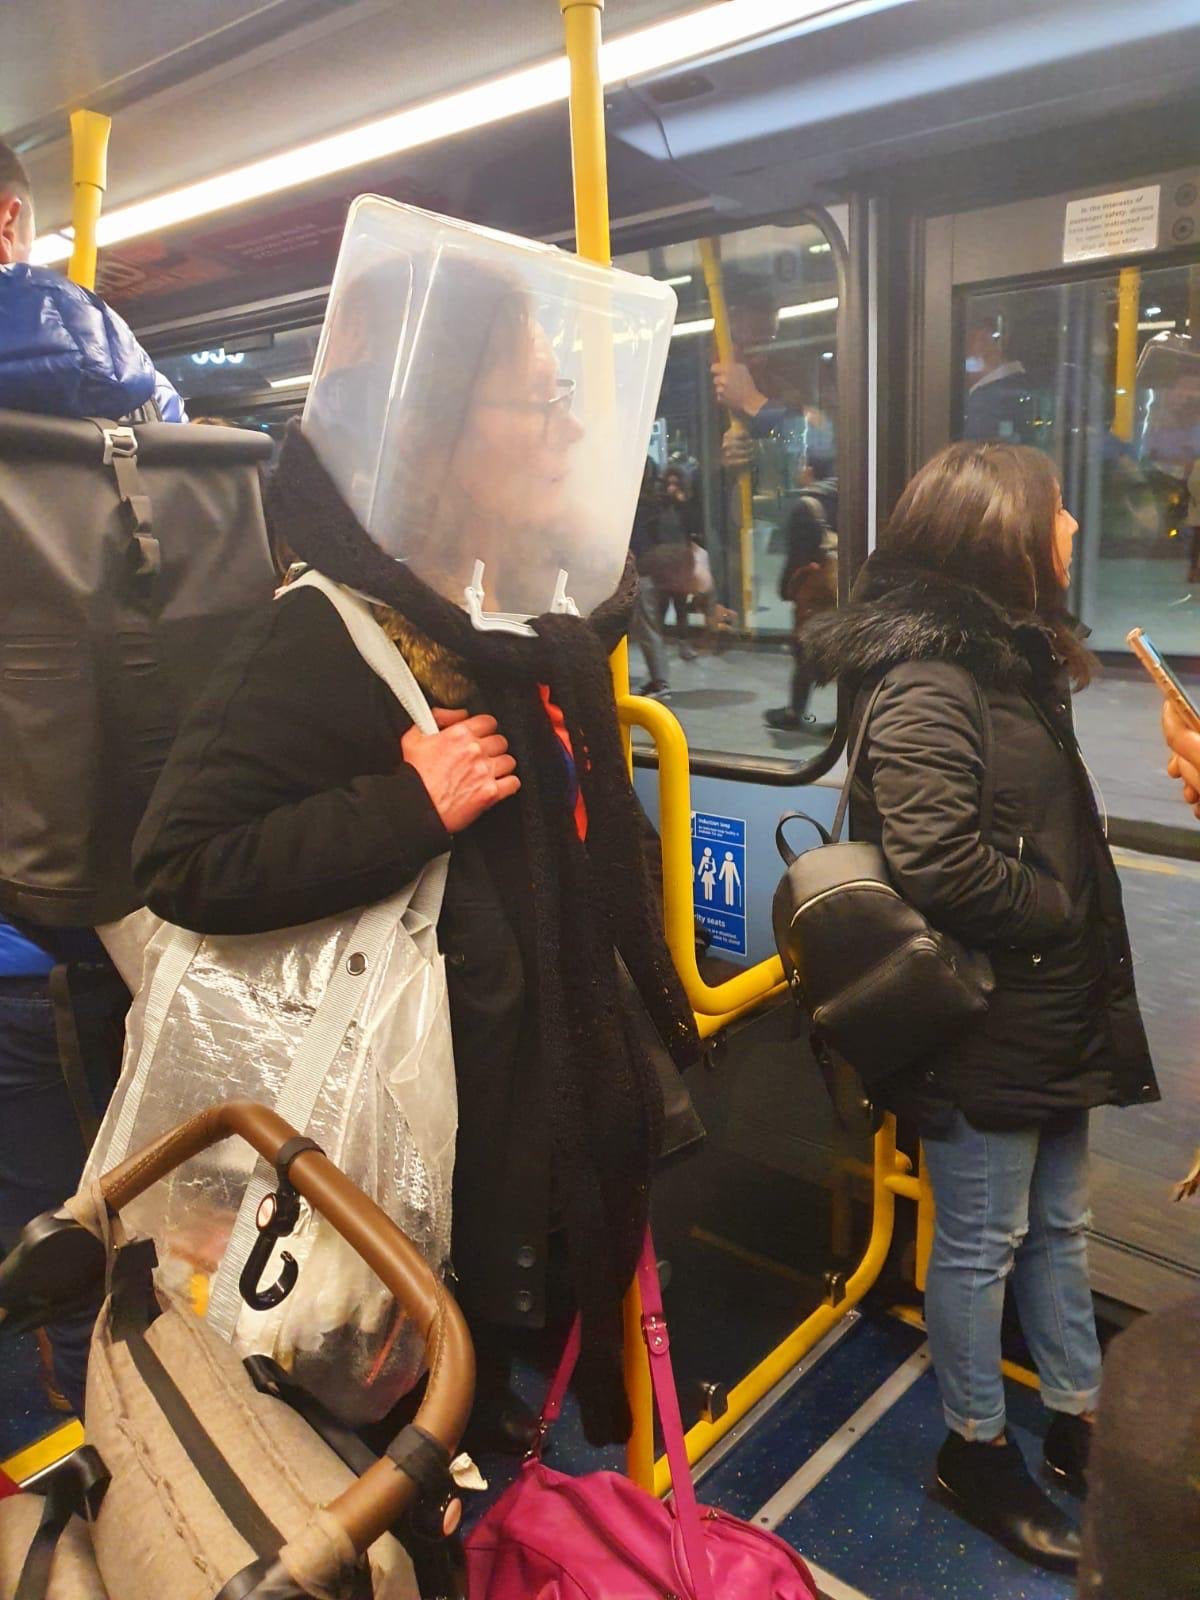 Hilarious Photos Shows Creative Ways Londoners Use to Avoid Being Infected with Covid-19 - WORLD OF BUZZ 3